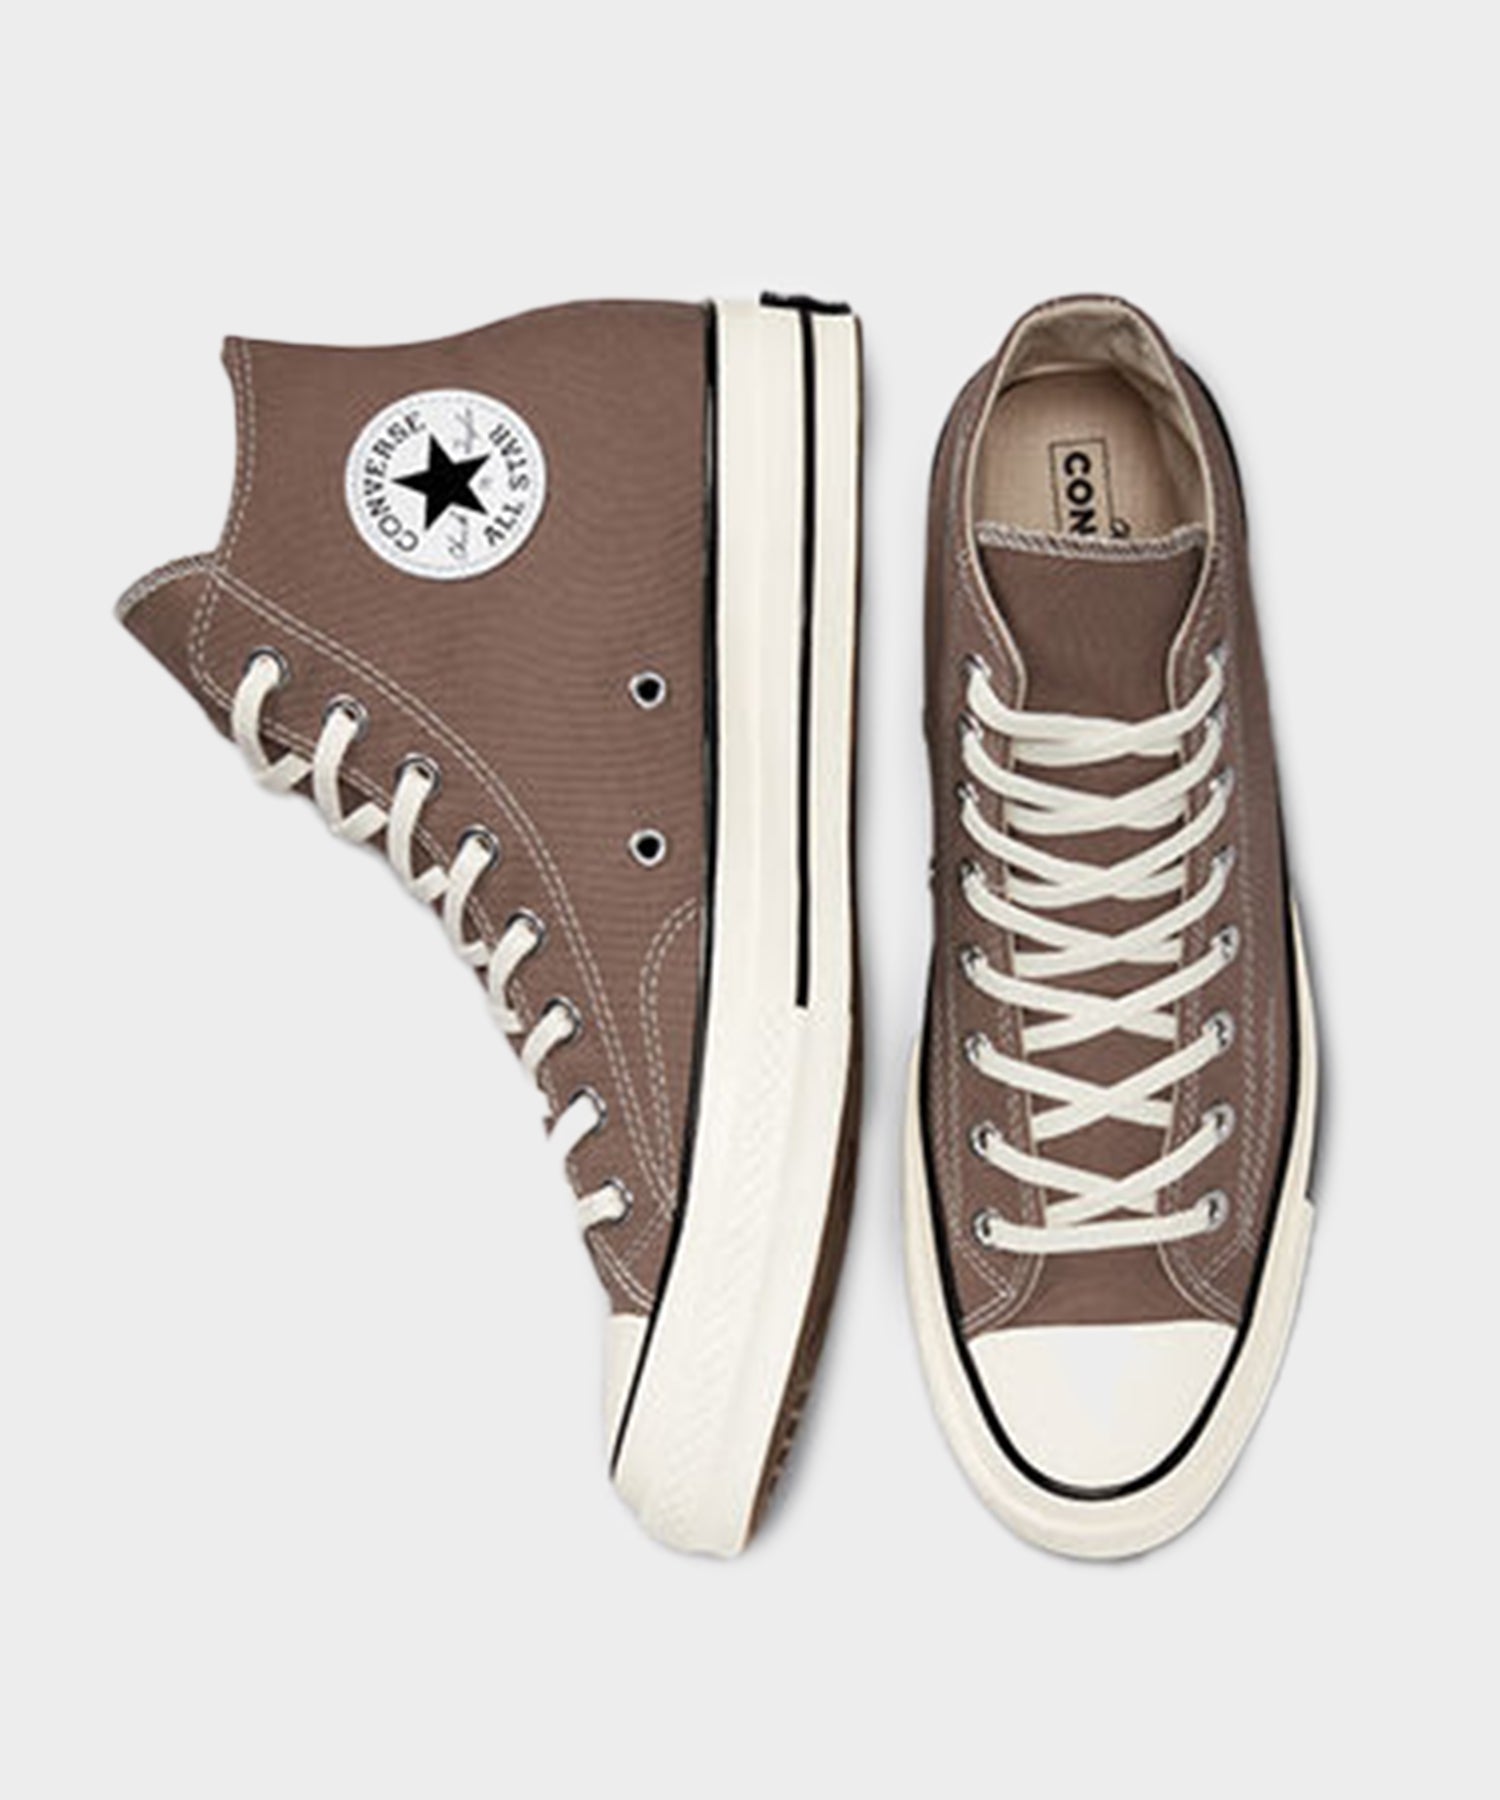 Uskyld loop Outlaw Converse Chuck 70 High Top In Squirrel Brown